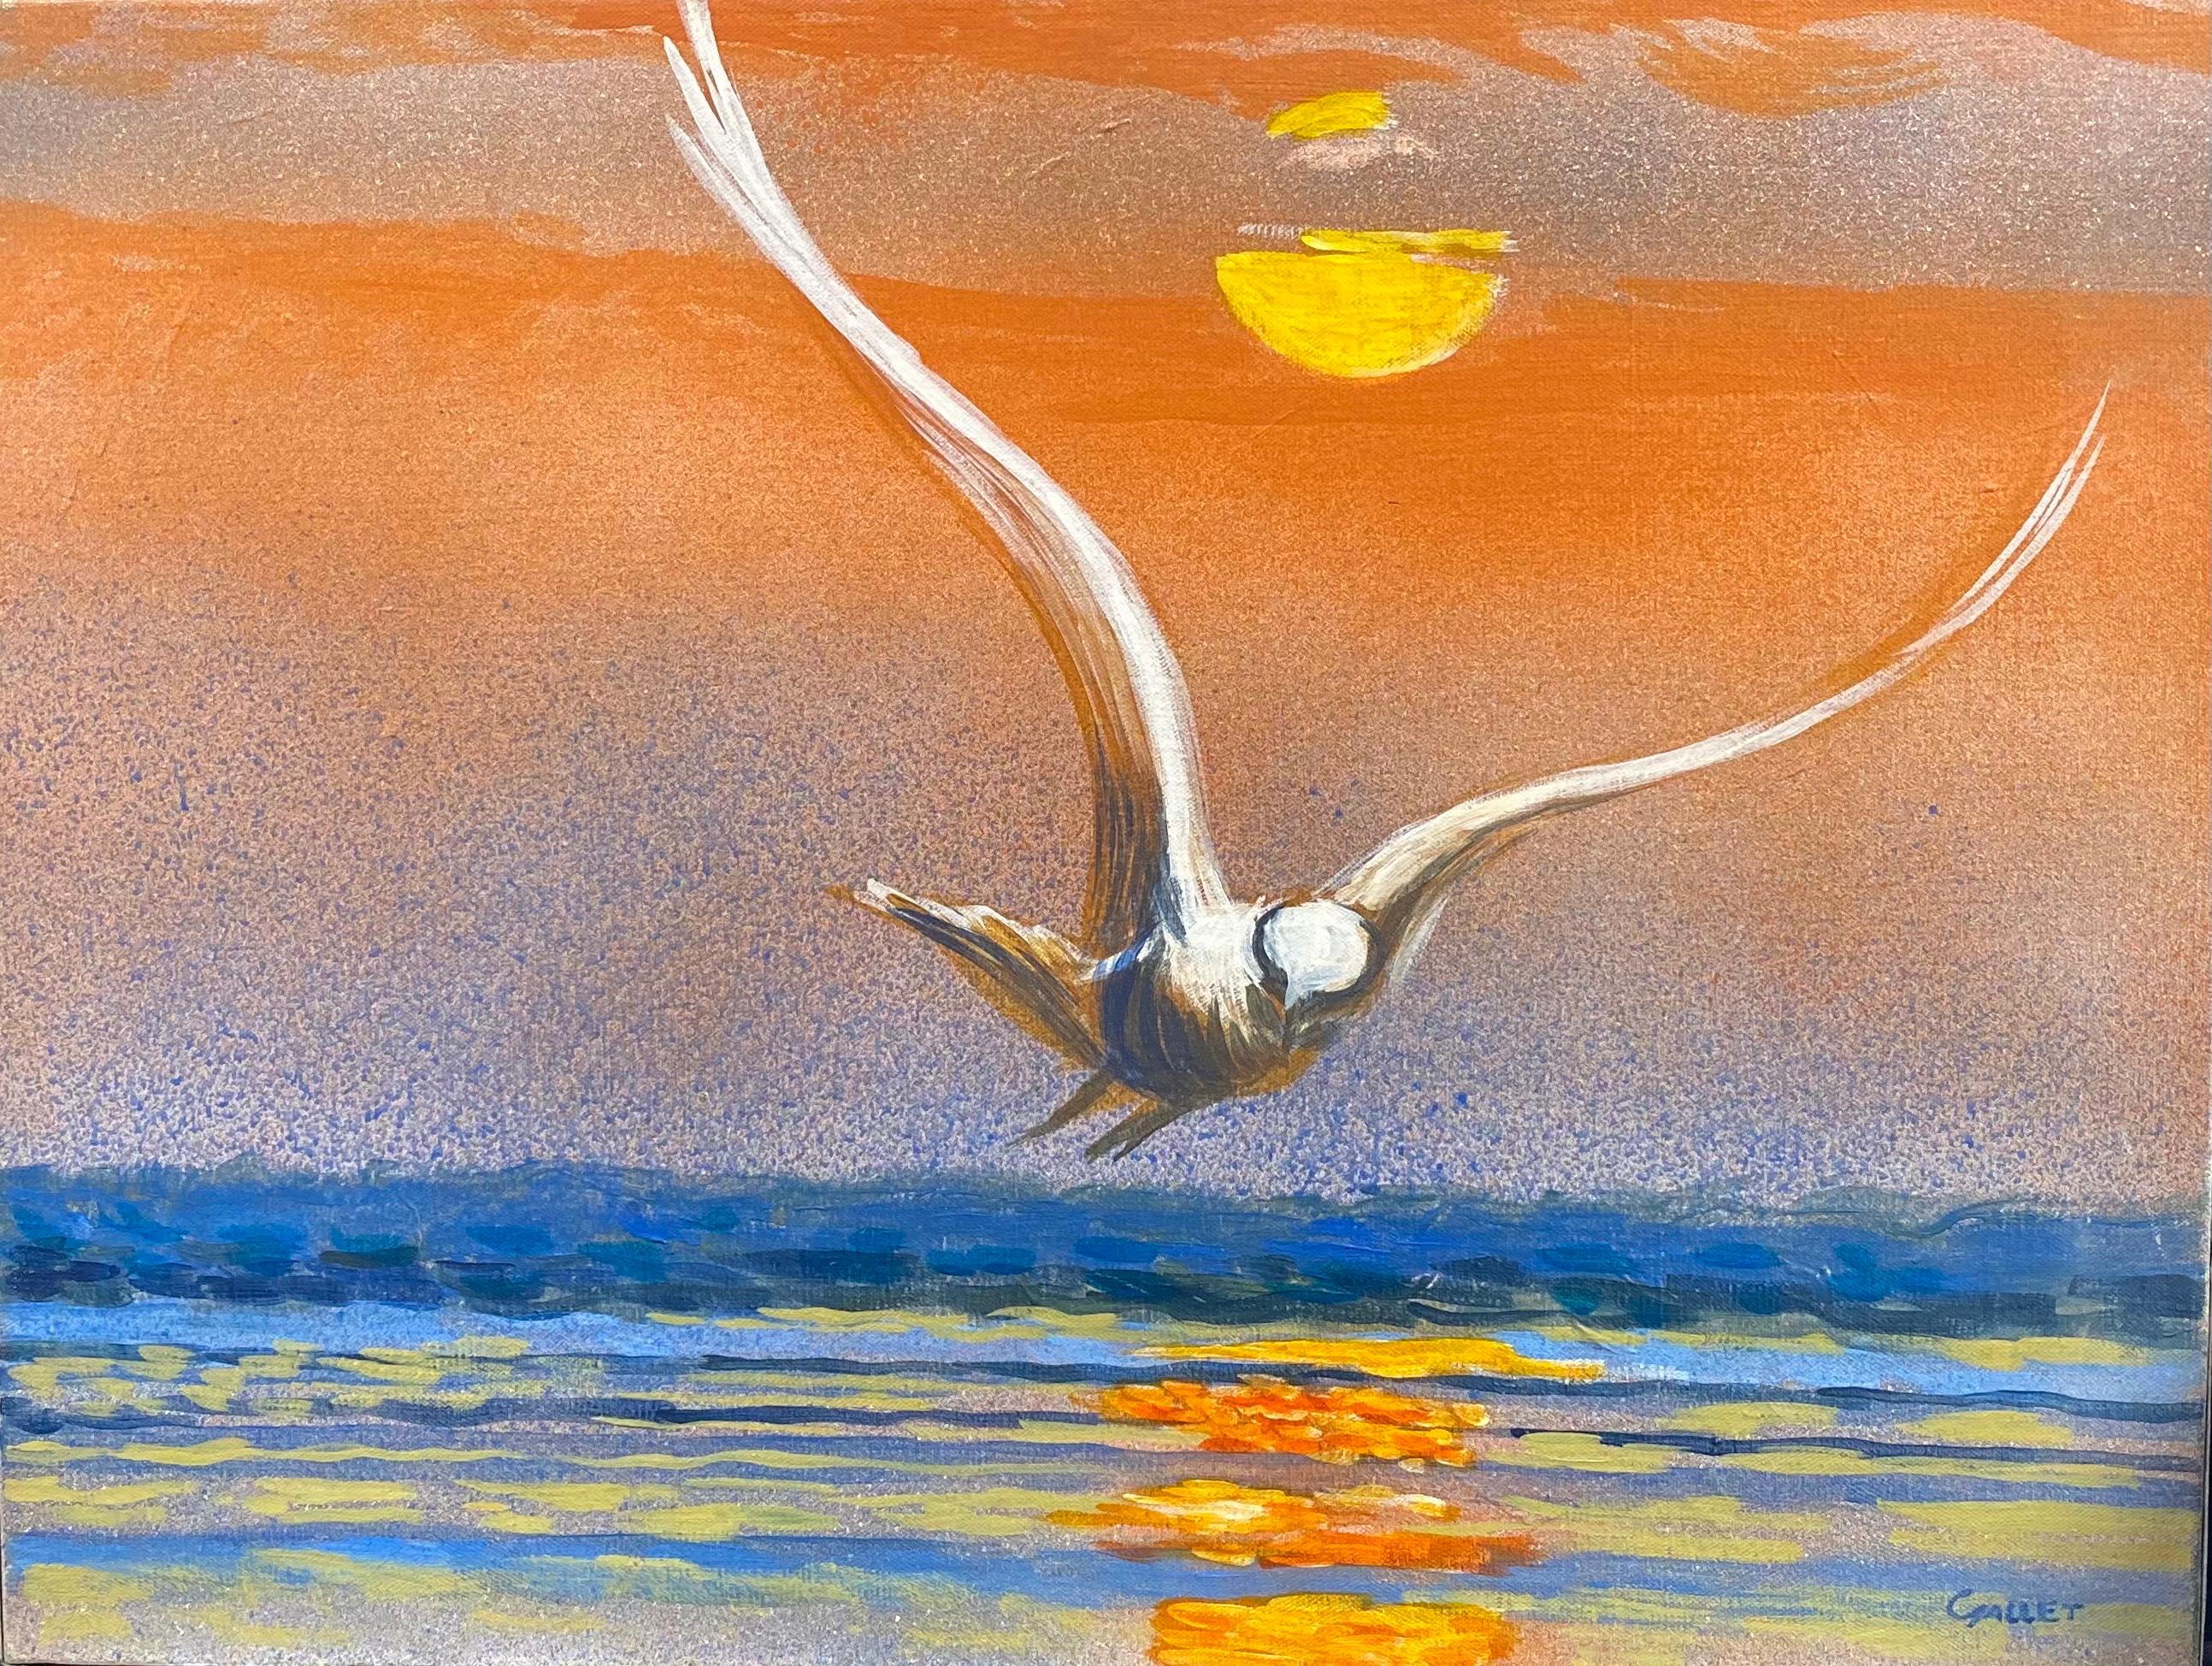 Seagull in Flight Sunset Seascape, Signed Large Oil Painting